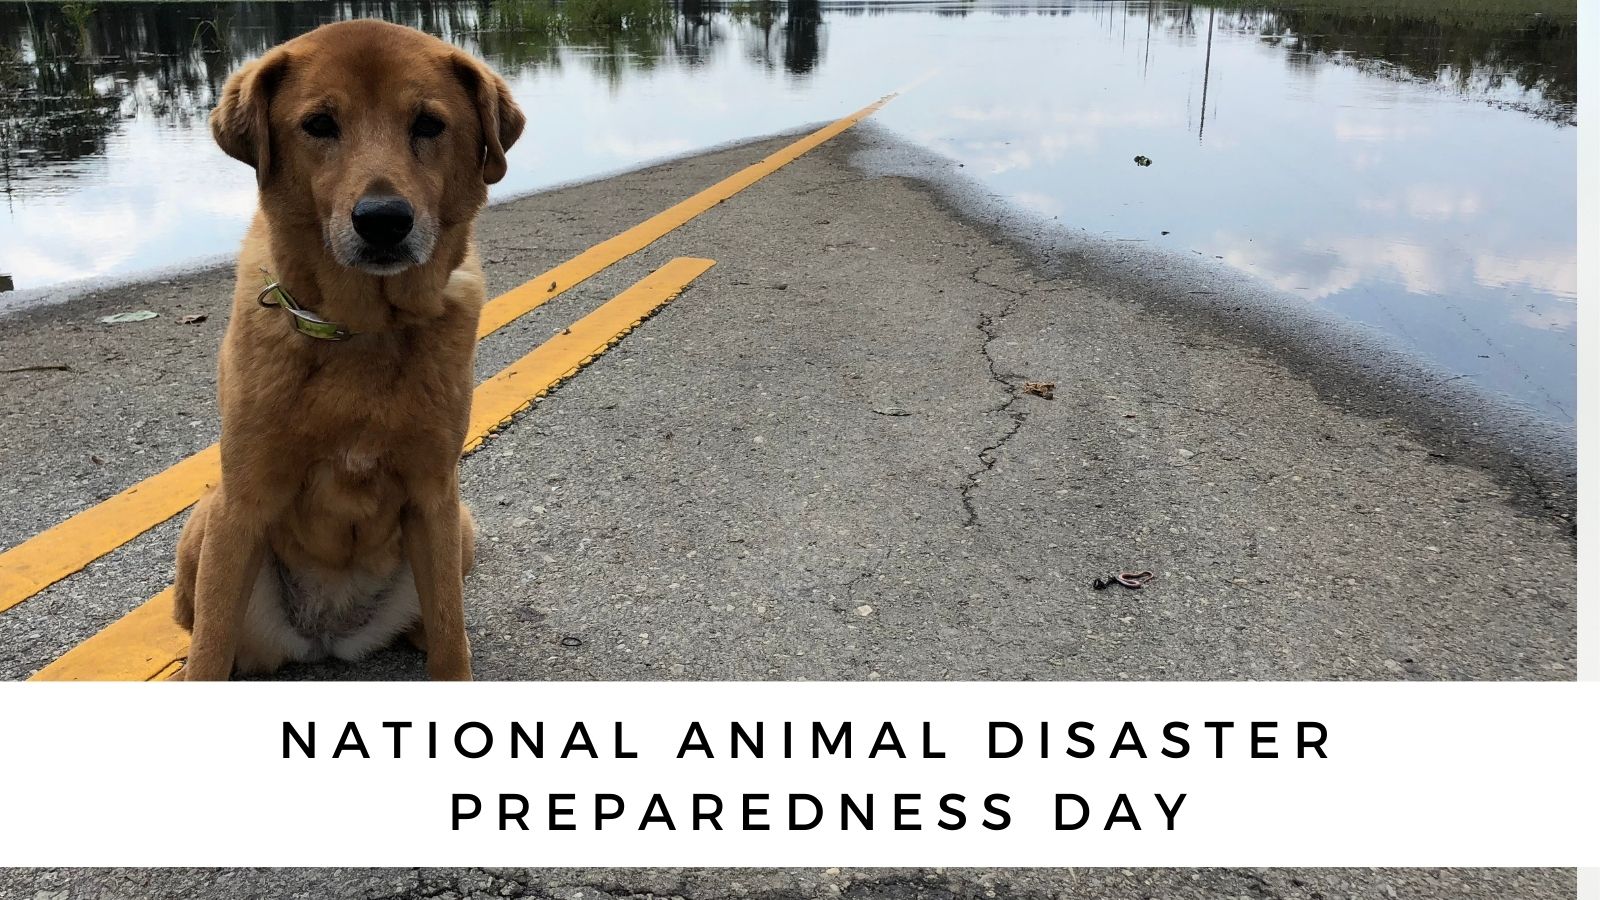 National Animal Disaster Preparedness Day {Get Your Dog Ready!}